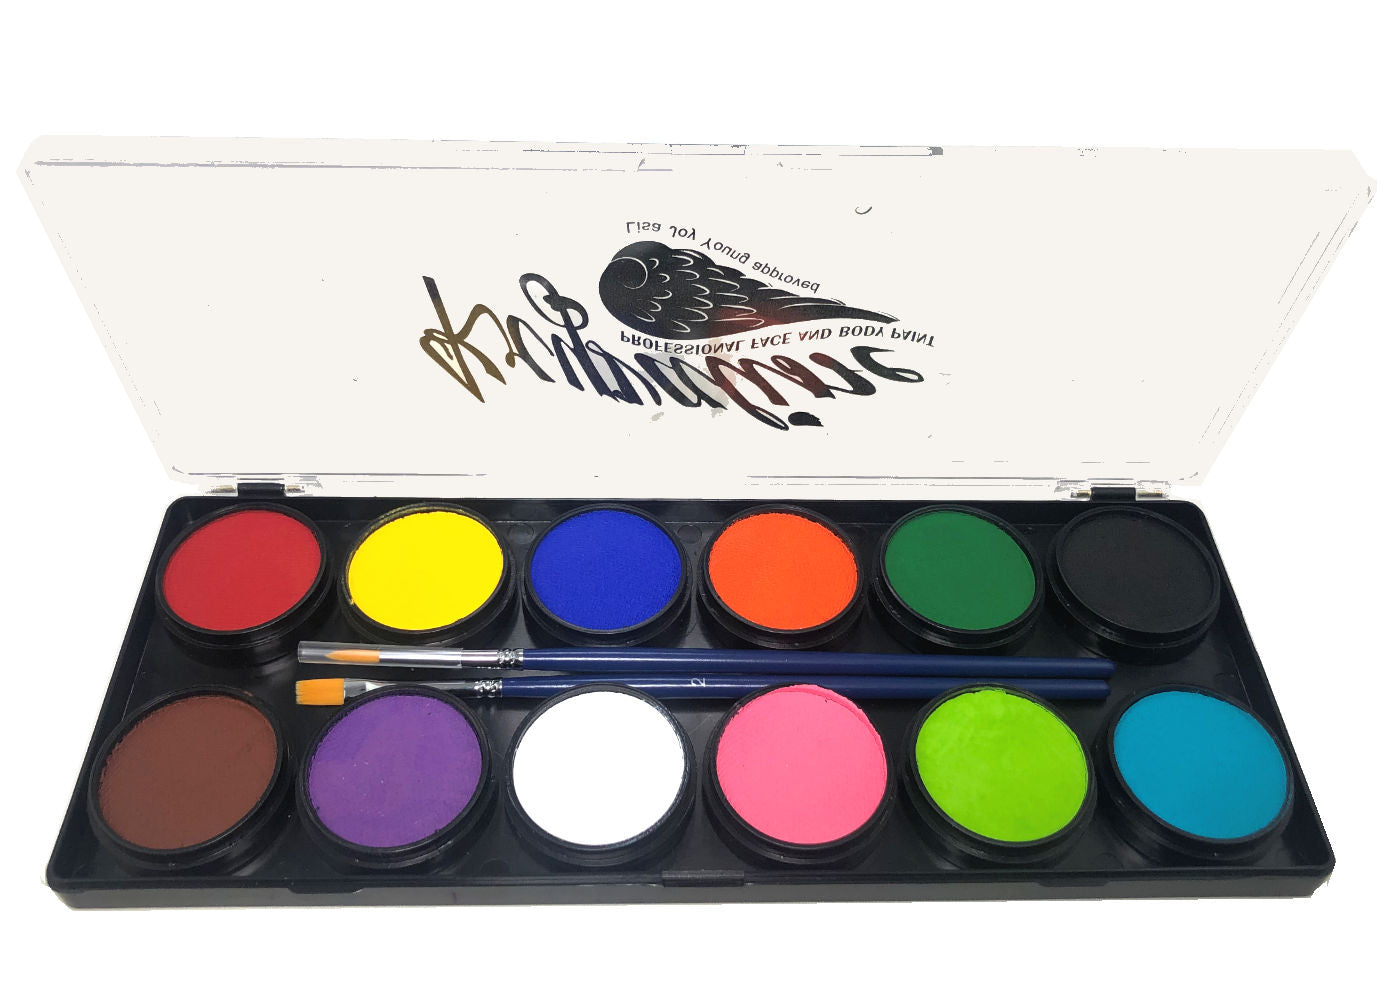 Face and Body Painting Palette with 12 Common Colors 10g each - Kryvaline Body Art Makeup | Glitter Tattoos, Face & Body Paint, Design - Kryvaline Body Art Makeup